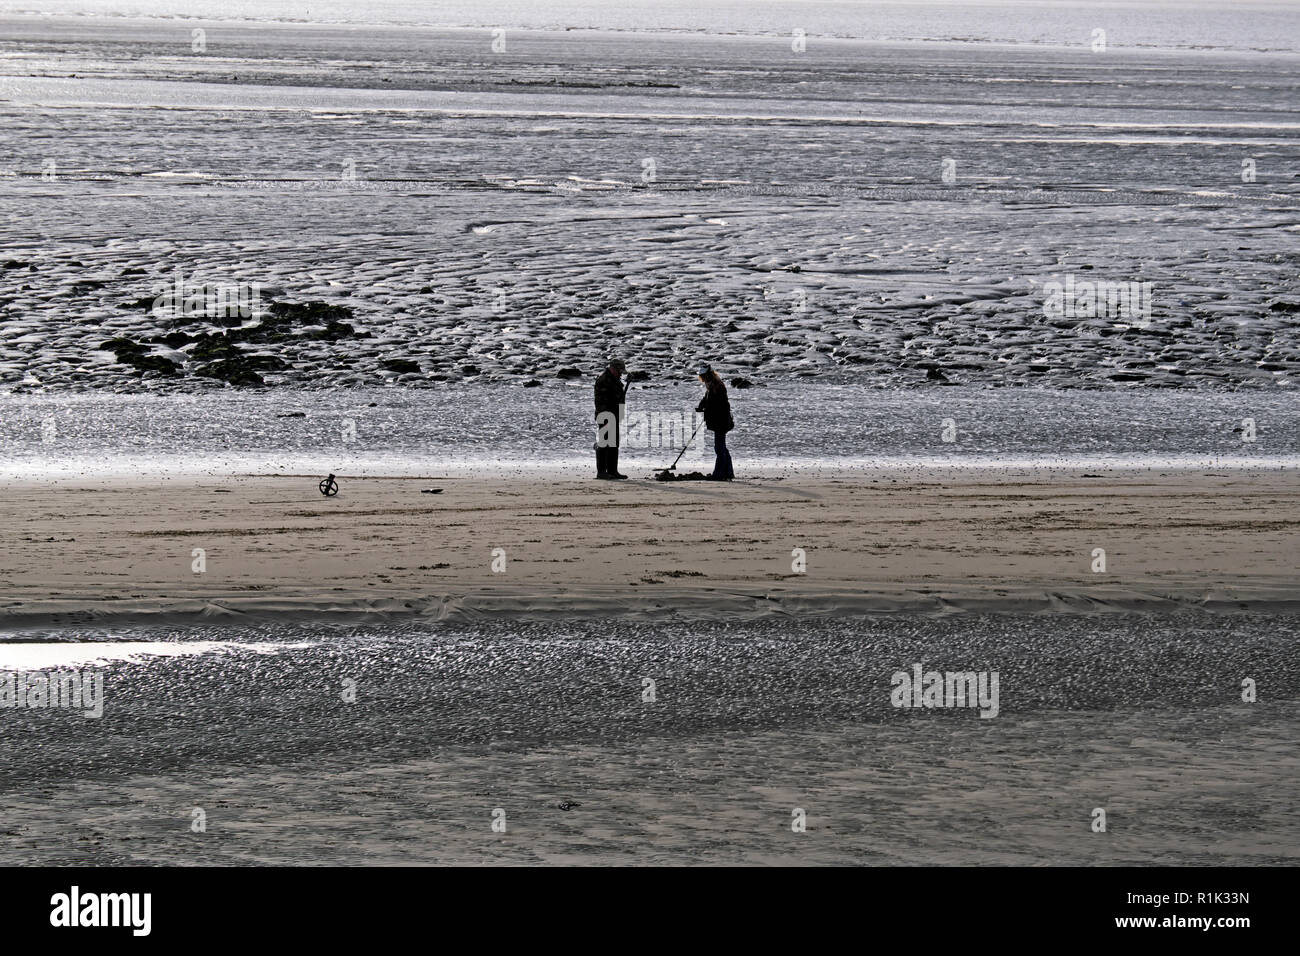 Weston-super-Mare, UK. 13th November, 2018. UK weather: on a cloudy afternoon with sunny intervals, metal detectorists search the beach. Keith Ramsey/Alamy Live News Stock Photo